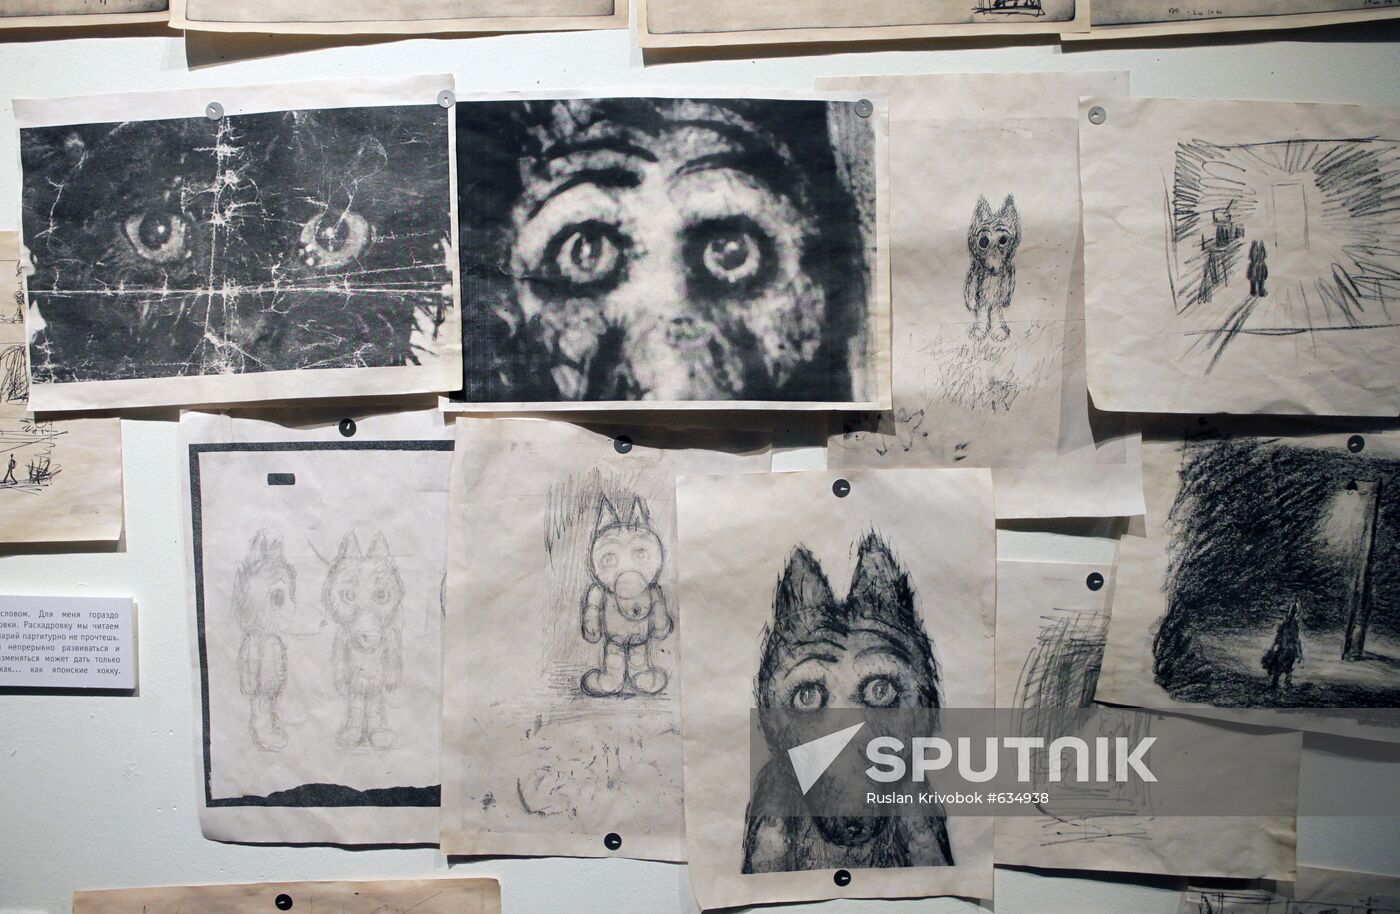 Preview of Yuriy Norstein's exhibition "The Big Eyes of the War"